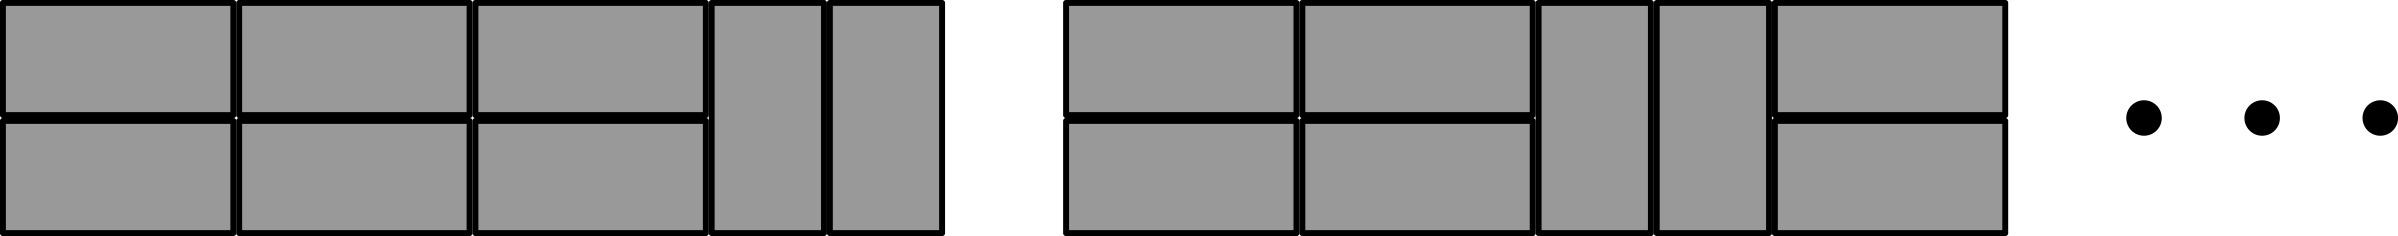 One arrangement has three pairs of horizontal rectangles followed by two vertical rectangles. The other has two pairs of horizontal rectangles, then two vertical rectangles, then a pair of horizontal rectangles.